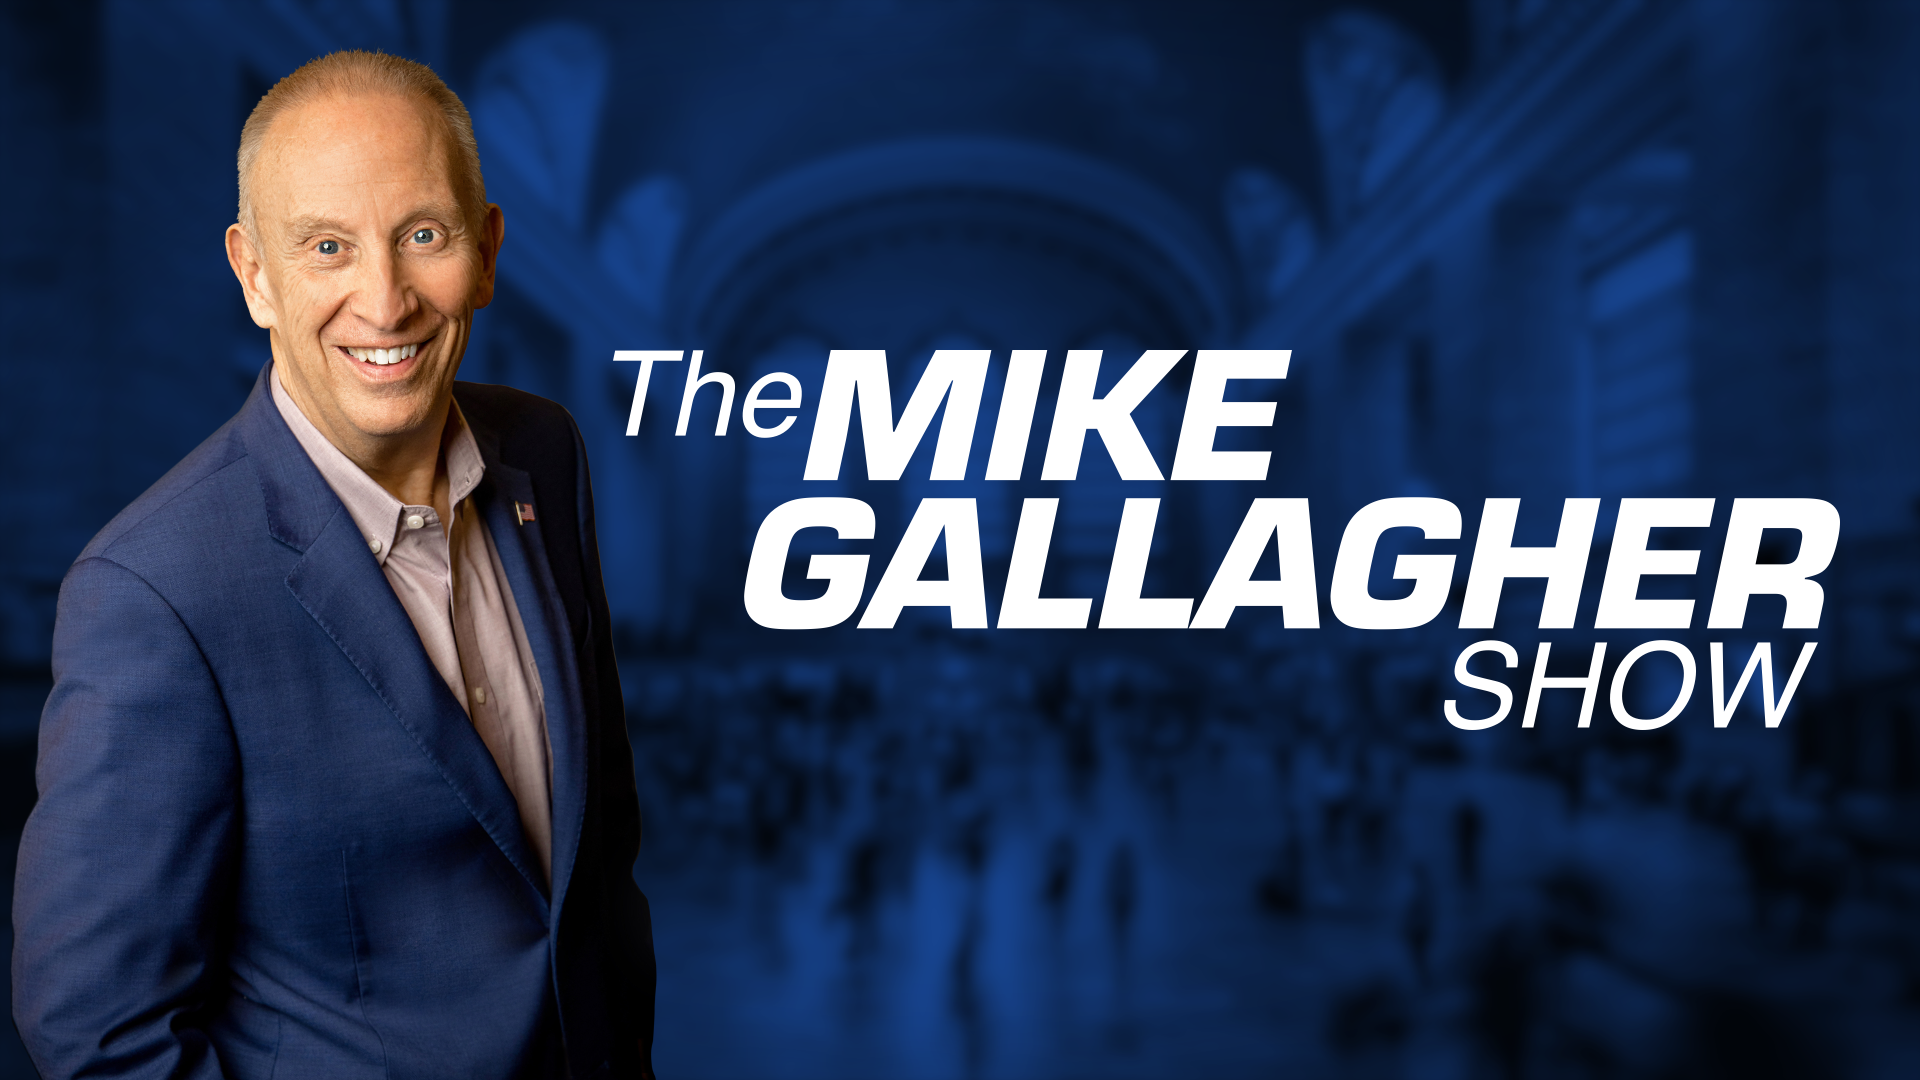 The Mike Gallagher Show Salem News Channel